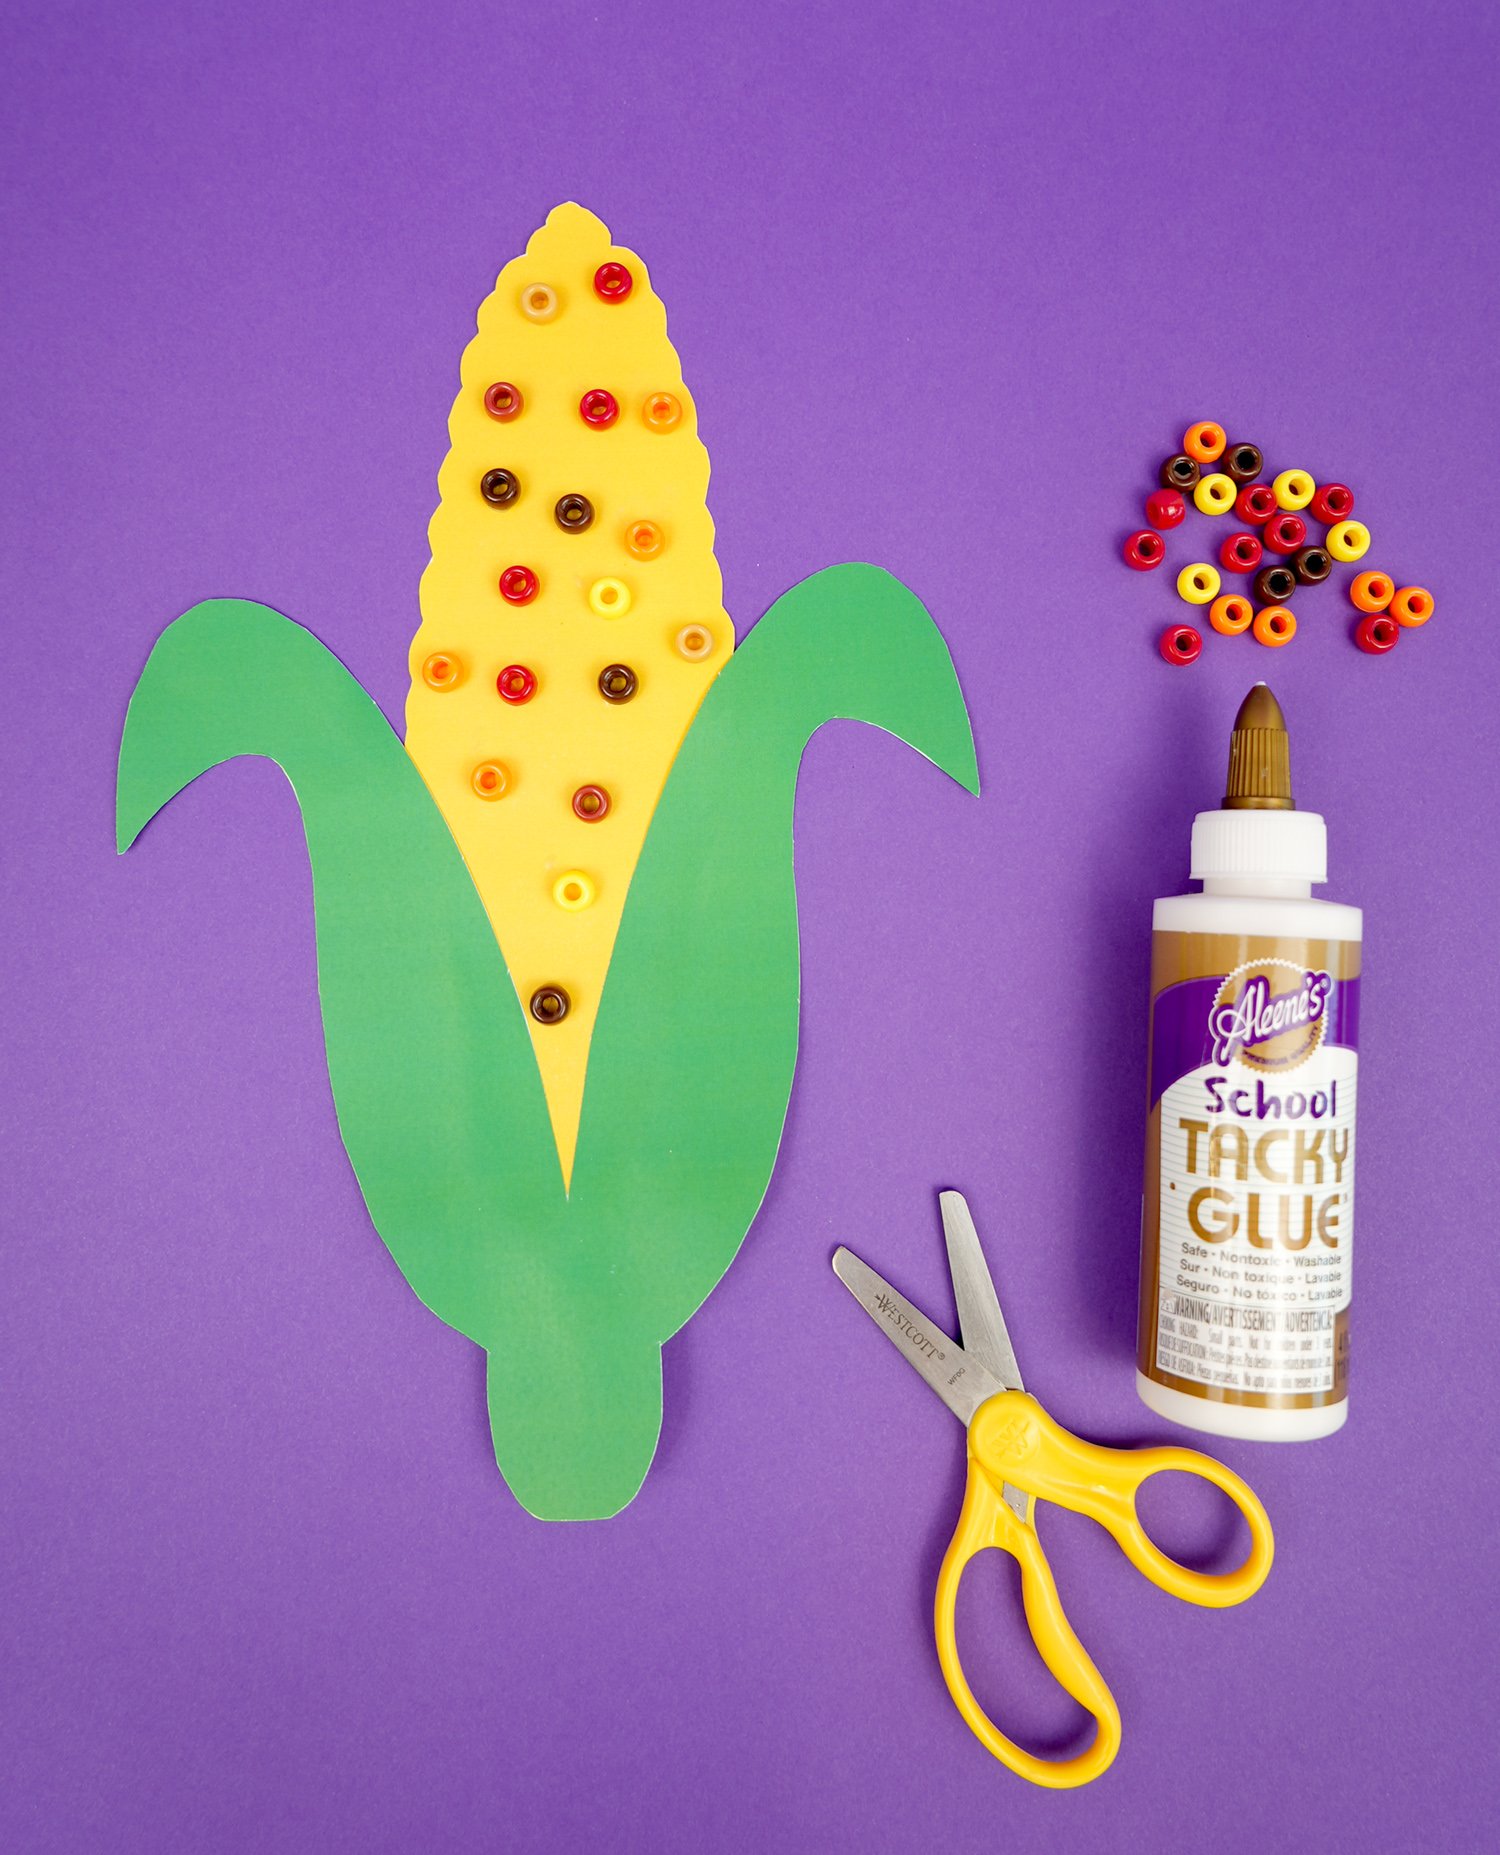 easy corn craft idea for kids to make with supplies